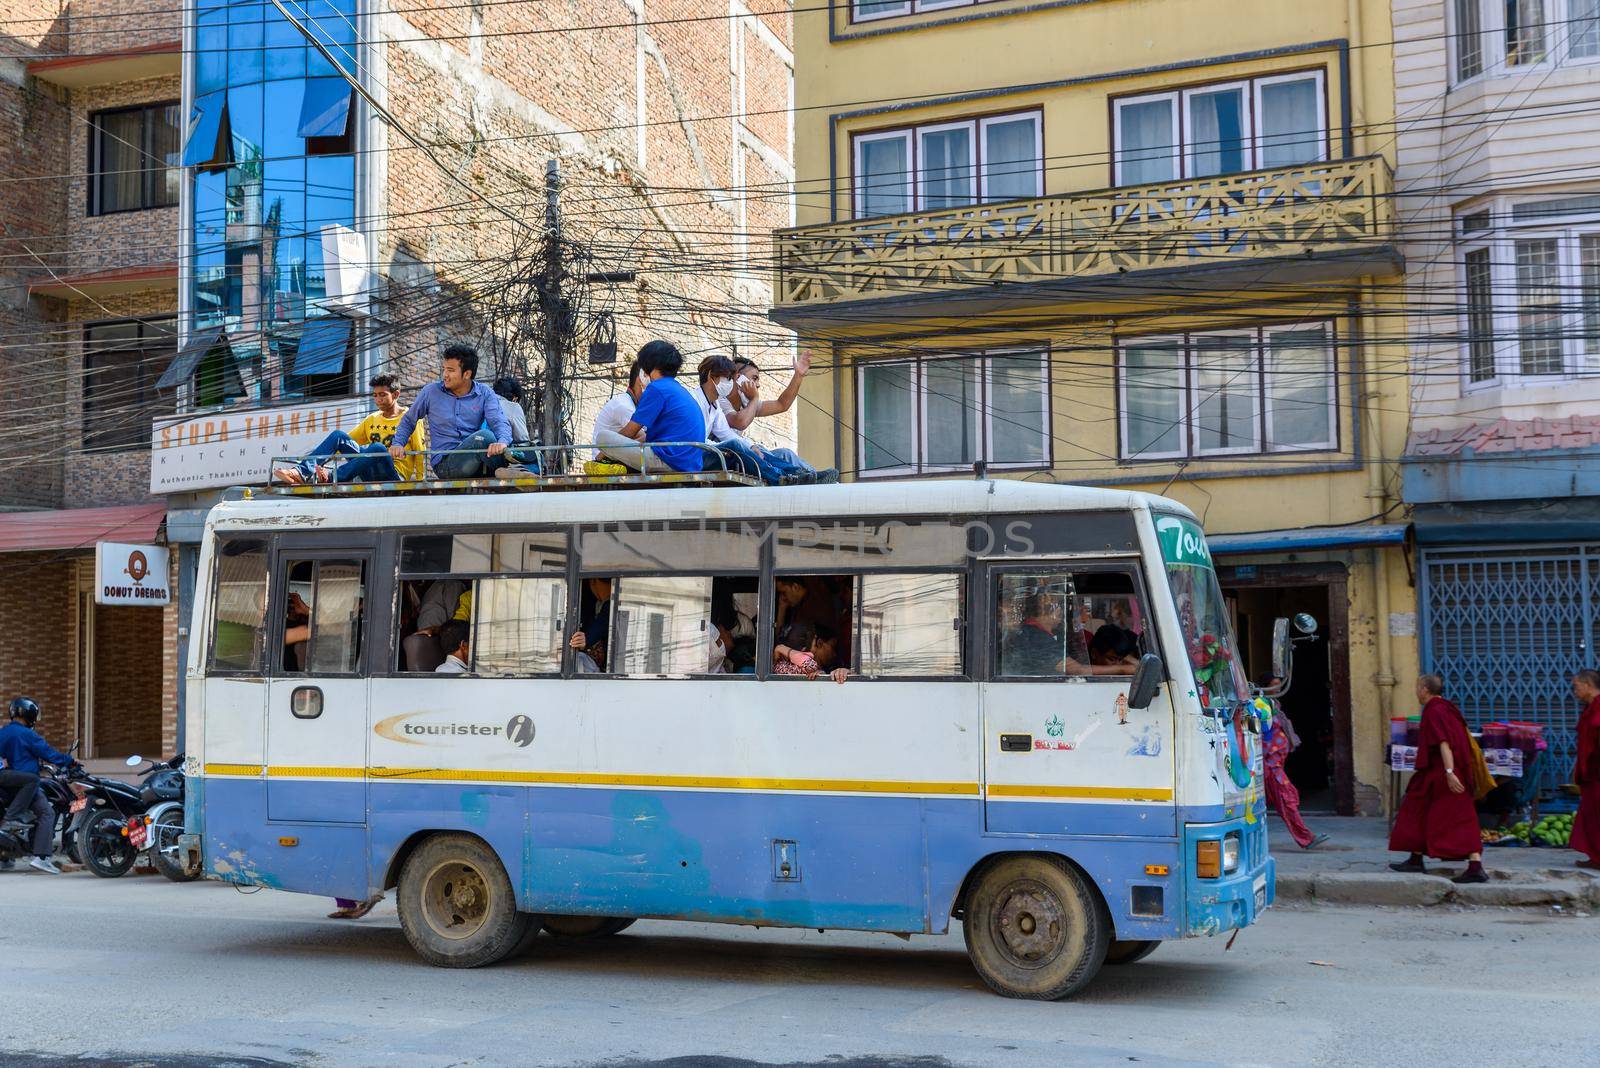 KATHMANDU, NEPAL - CIRCA NOVEMBER 2015: Men travel on top of a bus. Traveling on bus tops was authorized for a few months because of fuel shortage following a blockade at the India-Nepal border.